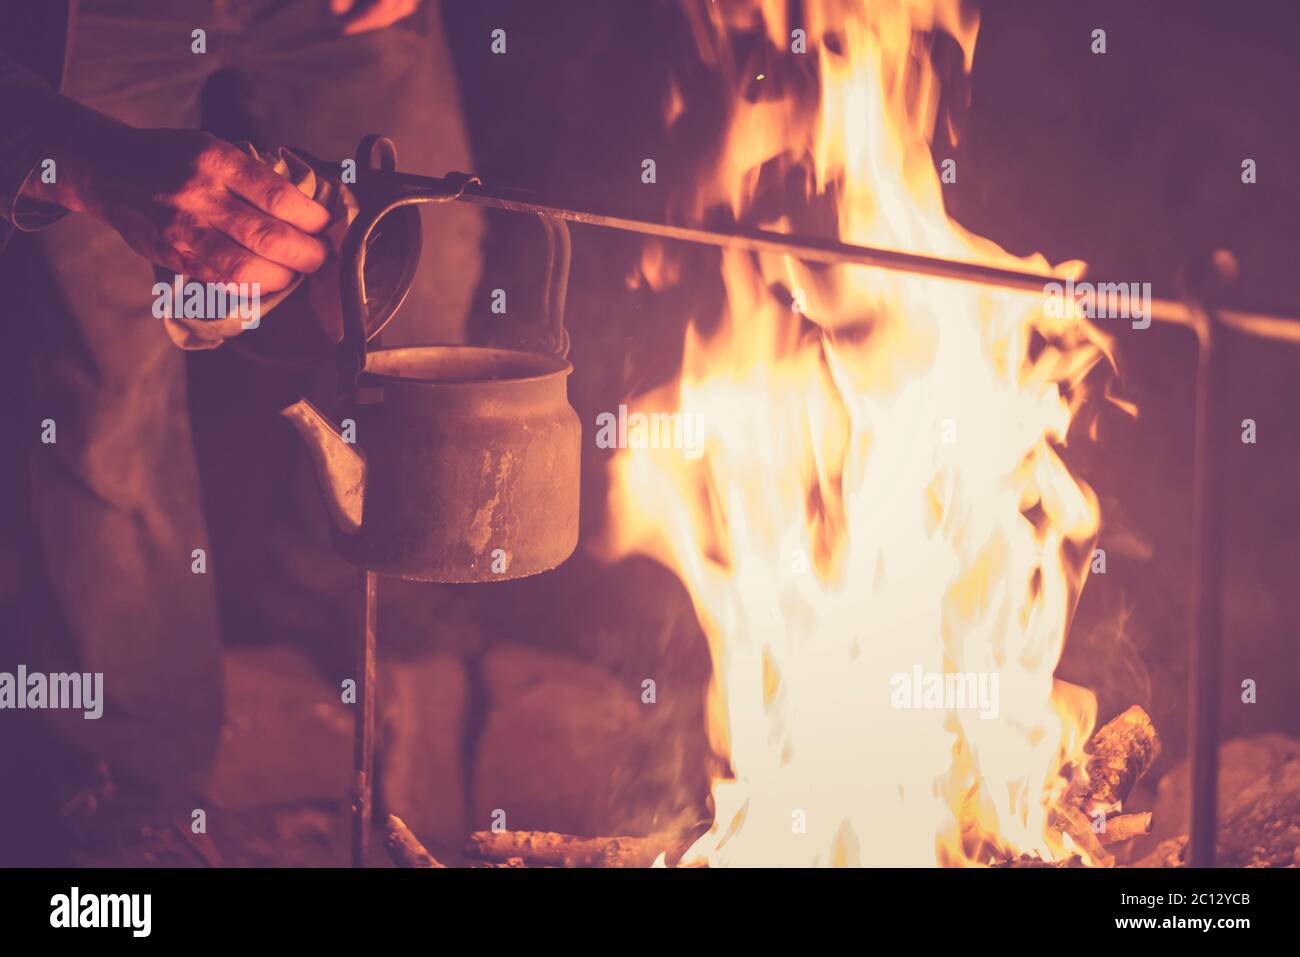 Kettle with water heated on the fire Stock Photo - Alamy